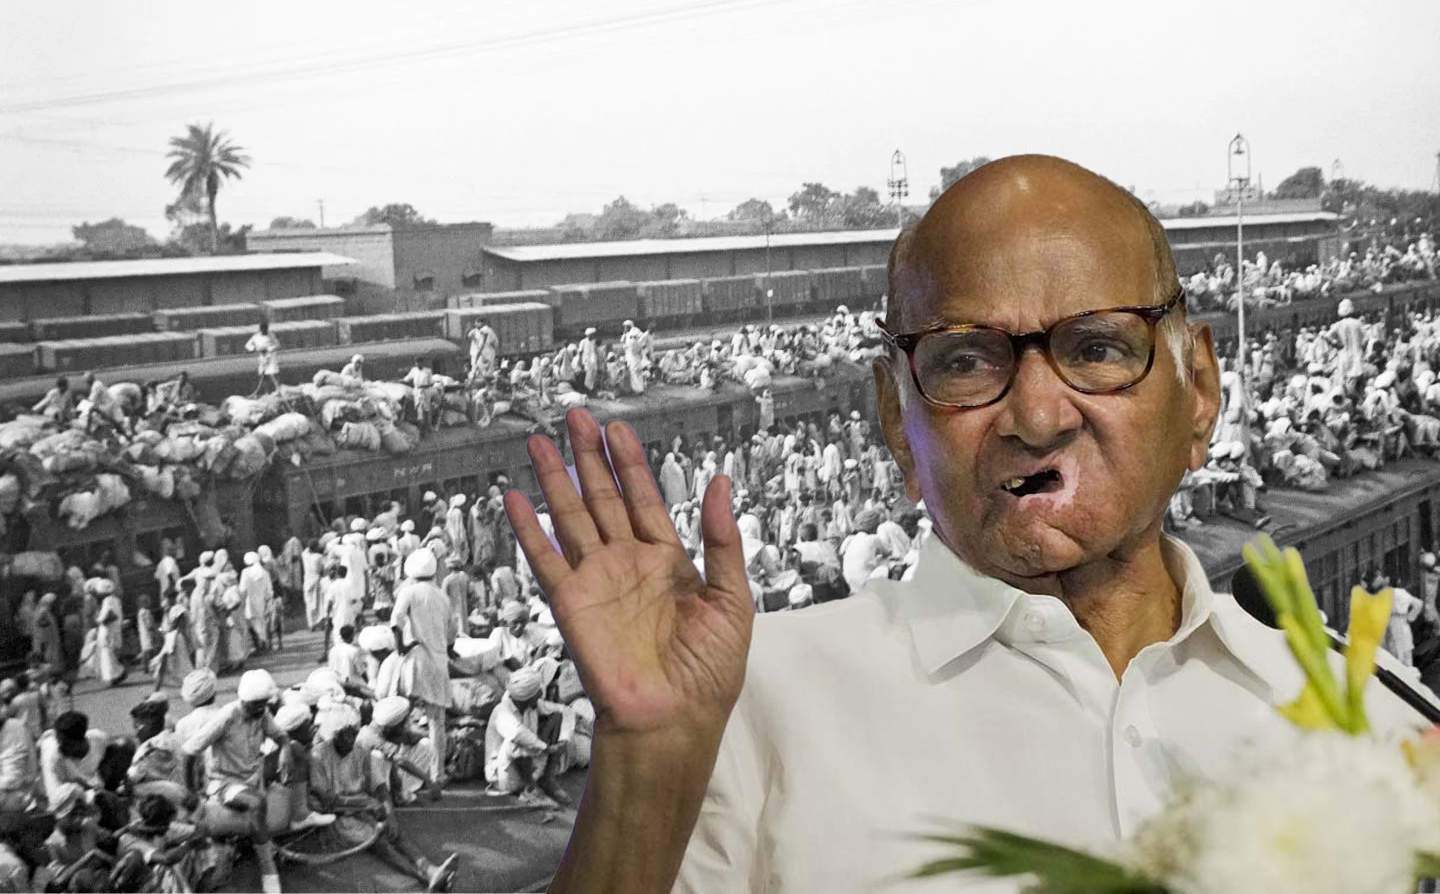 Sharad Pawar says he does not support teaching partition history to students